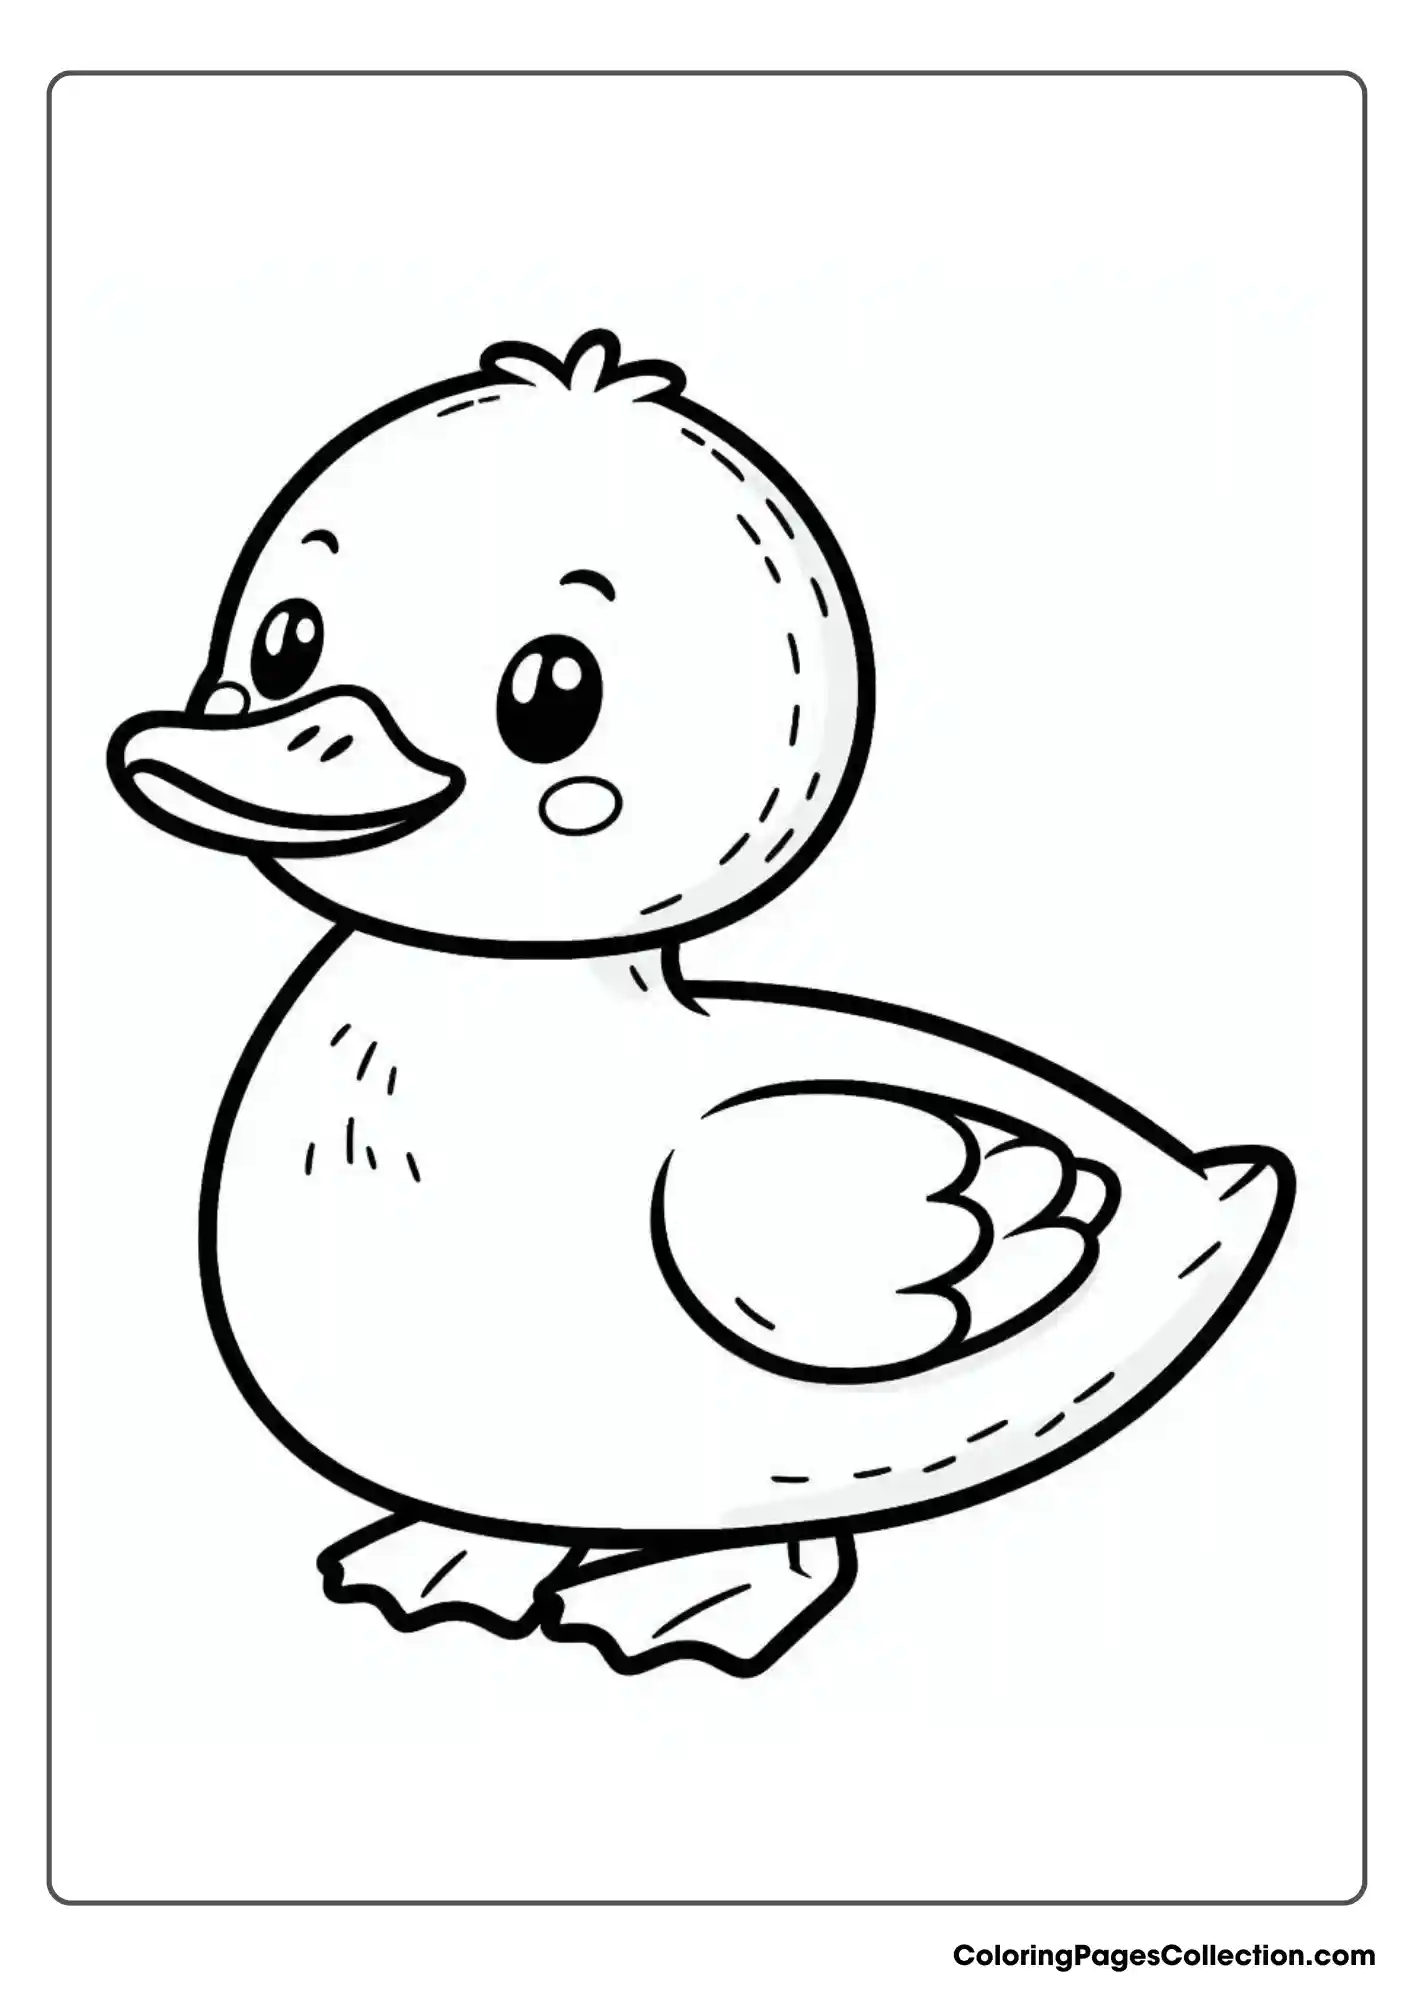 Duck With A Smiling Face